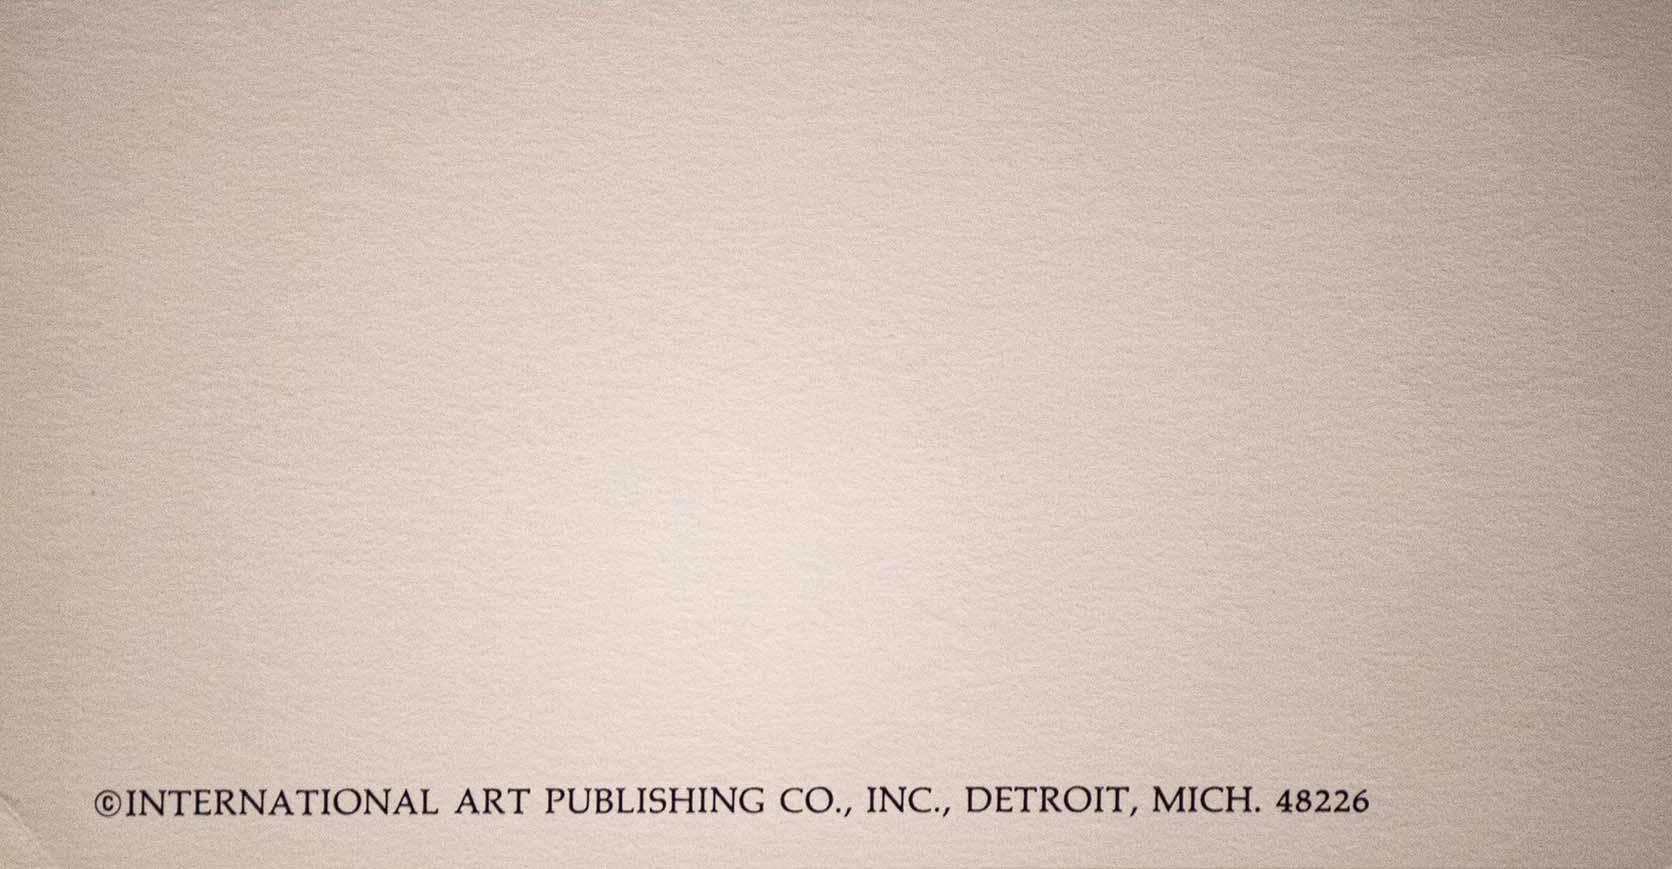 Print Published By International Art Publishing Co. Inc. Detroit
Measures 25 x 17.5 in.
In Good Condition
